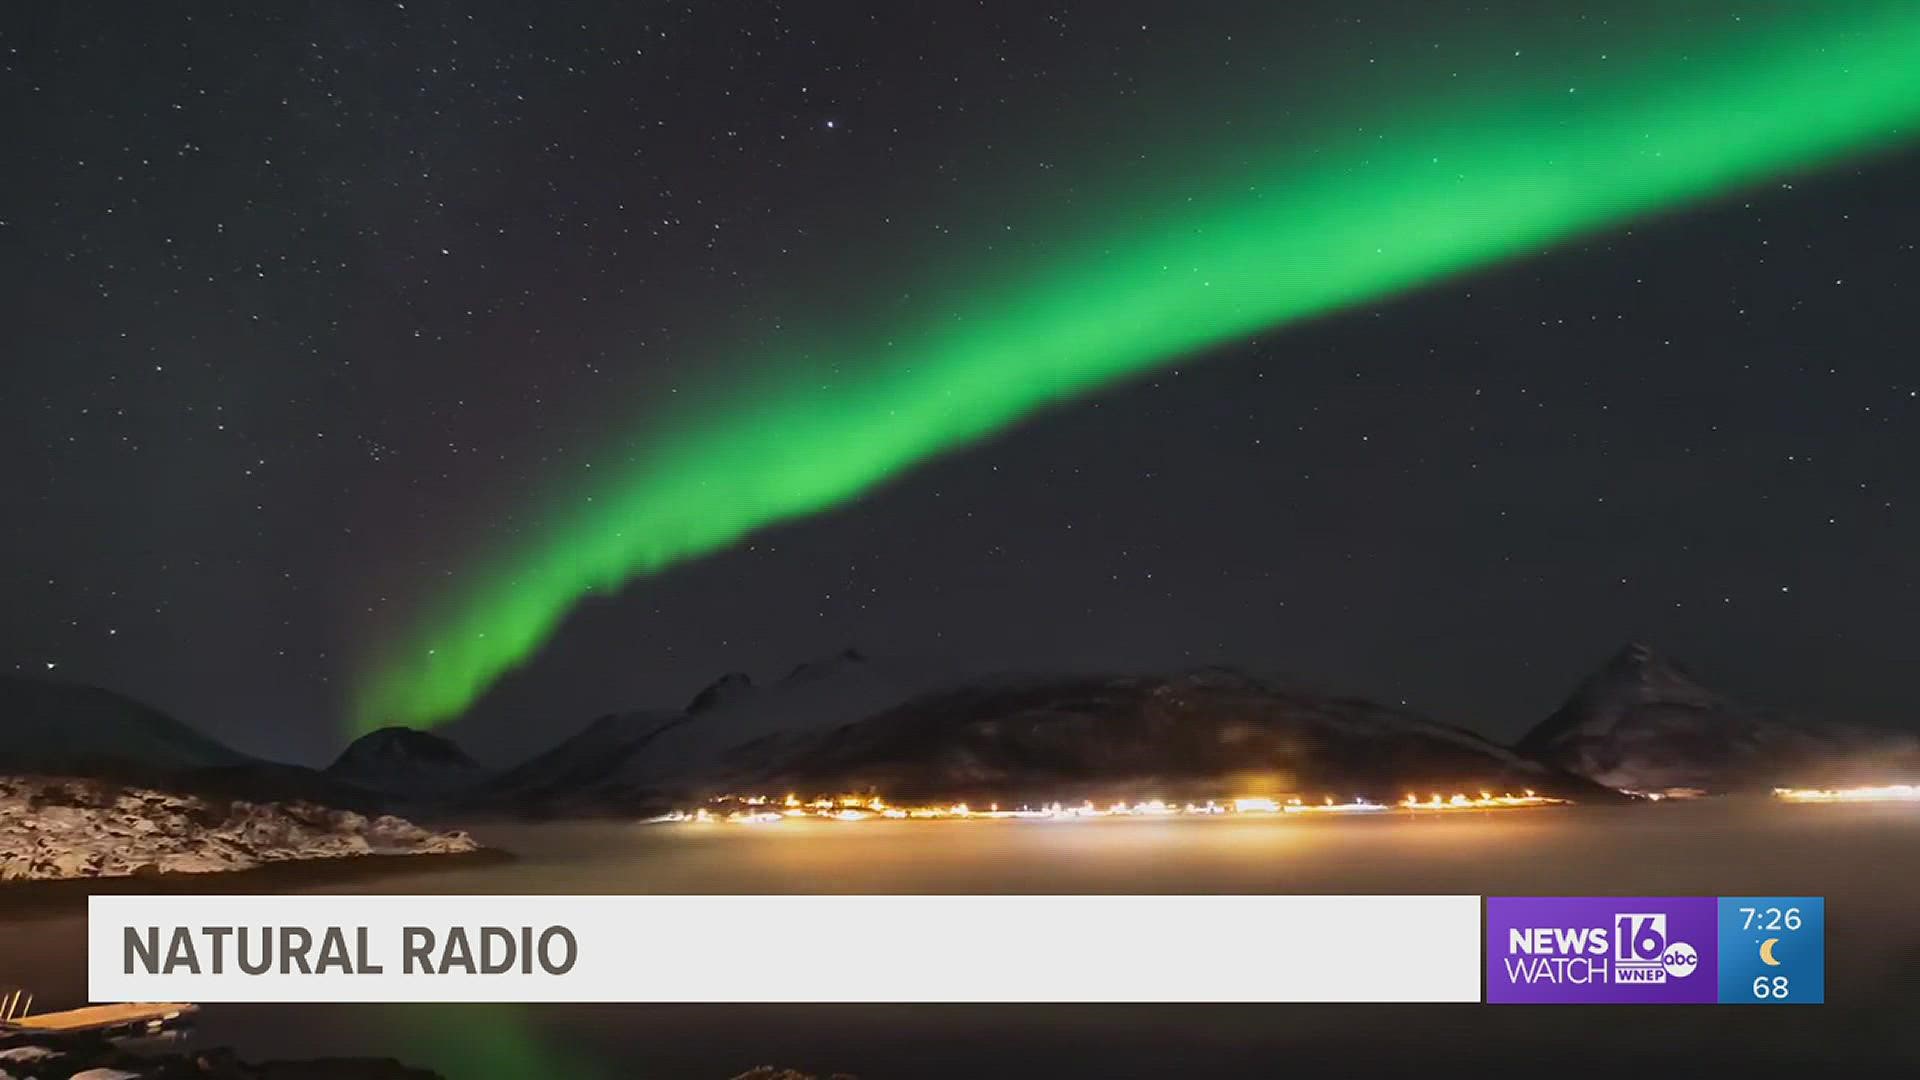 You won't hear it on the FM dial or satellite radio, but our earth is cranking out its own radio hits. Newswatch 16's John Hickey introduces us to natural radio.